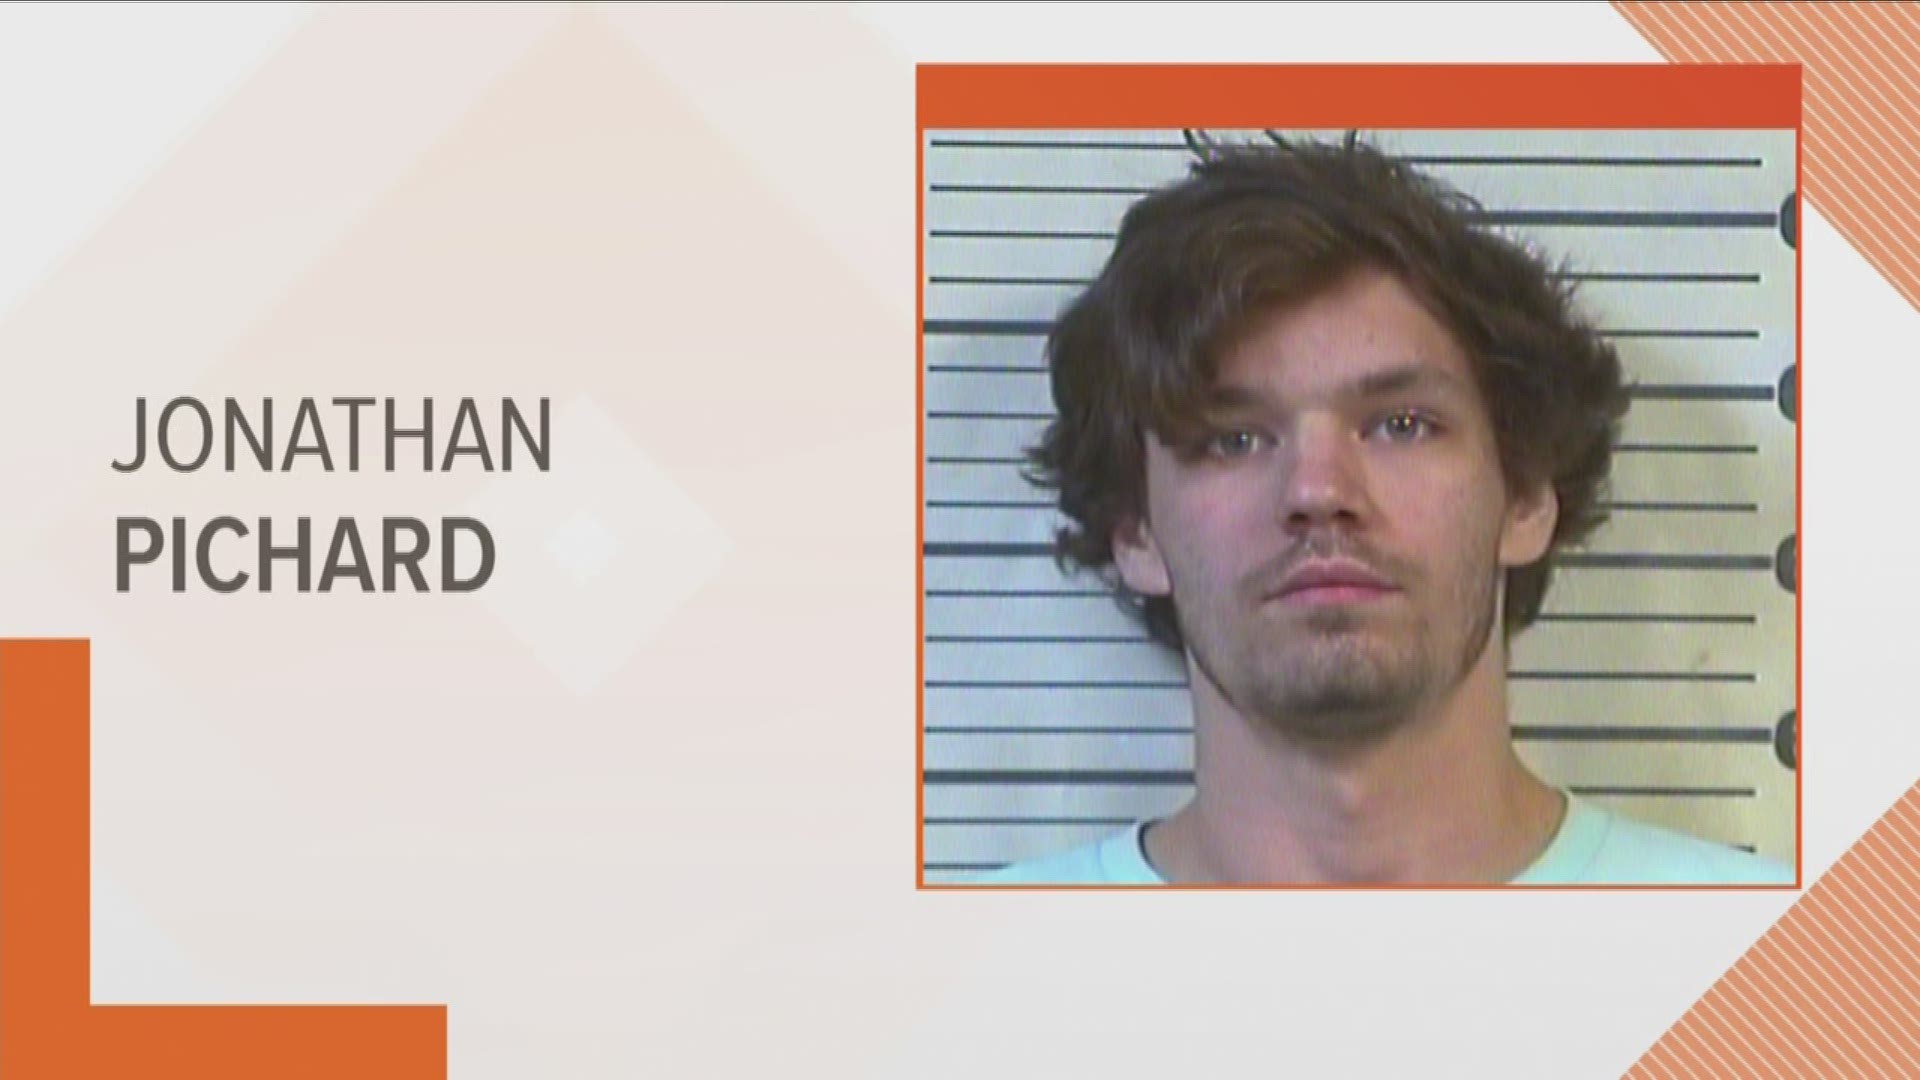 Investigators said Jonathan Pichard, 24, is charged with two counts of aggravated assault.